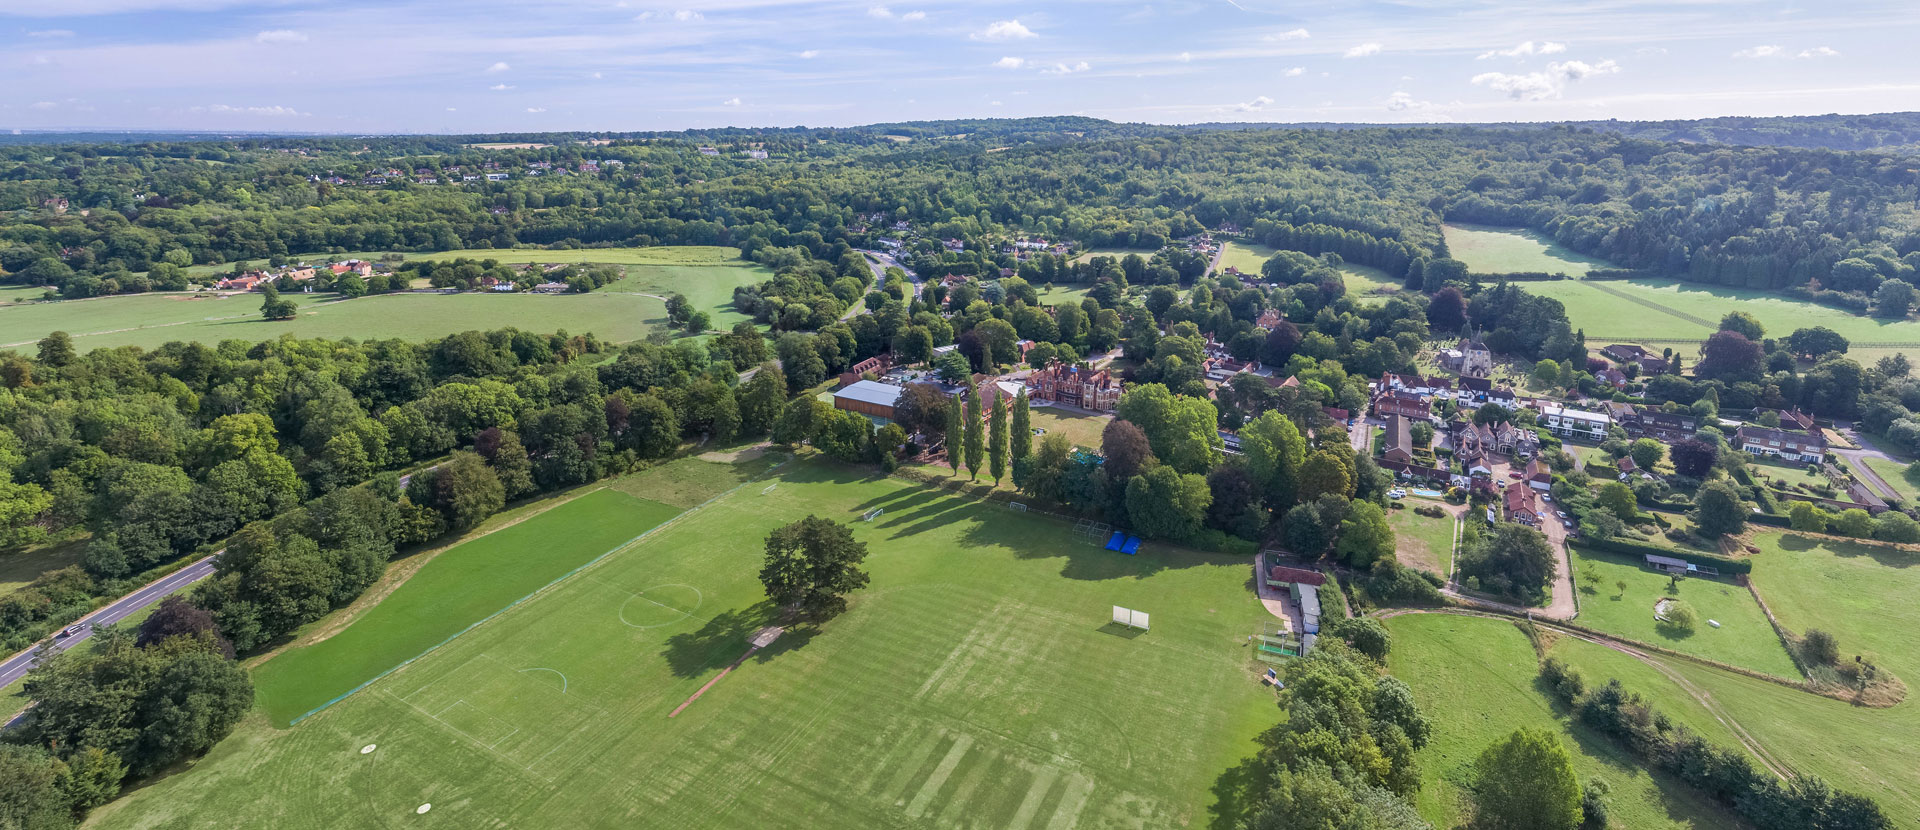 Aerial view of the school and countryside that surrounds it